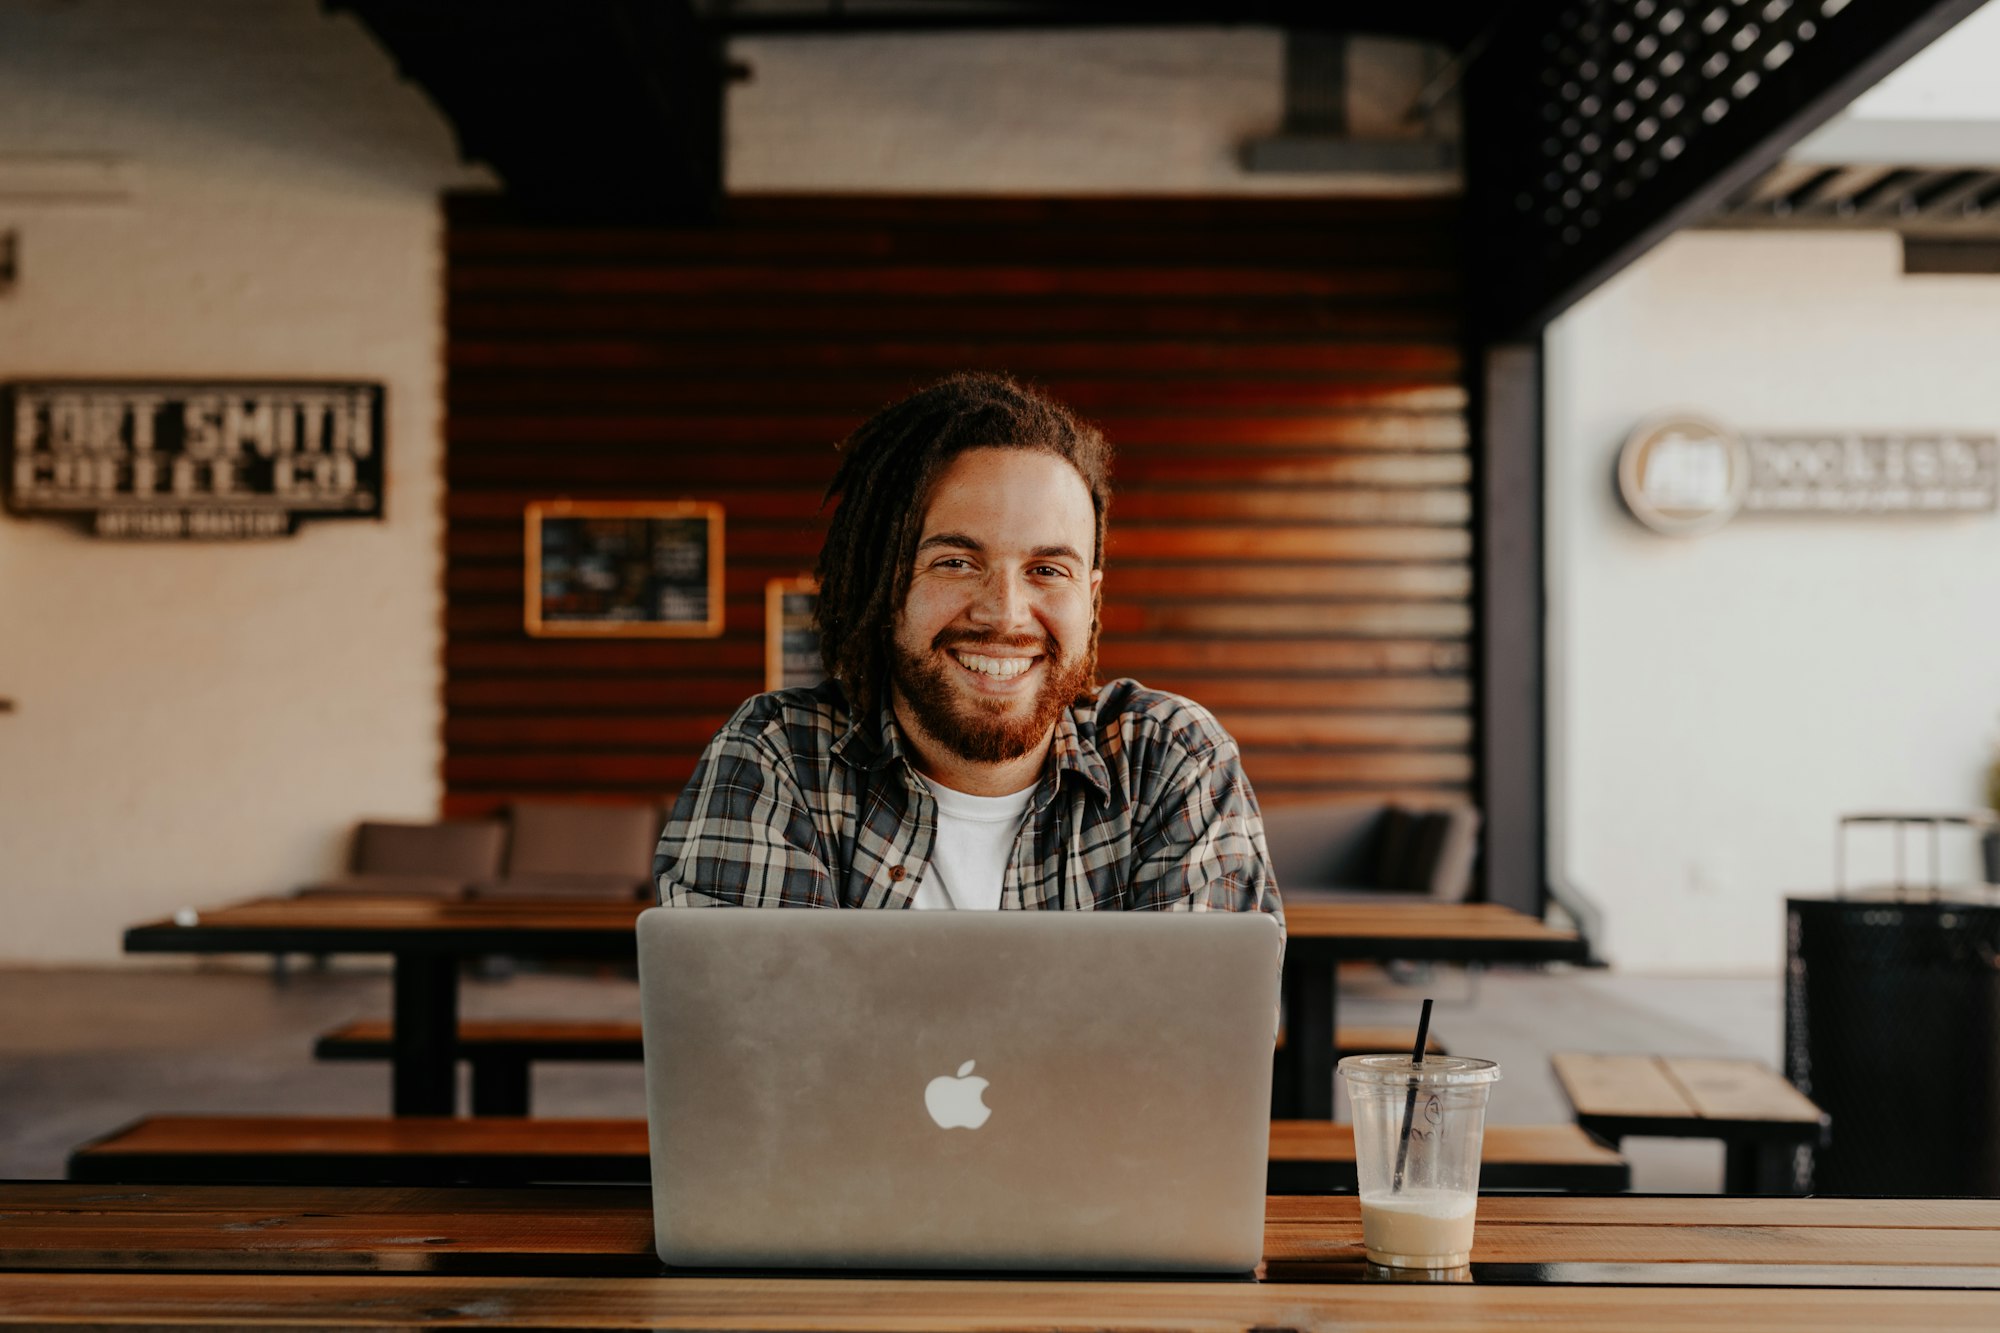 Man with a laptop smiling